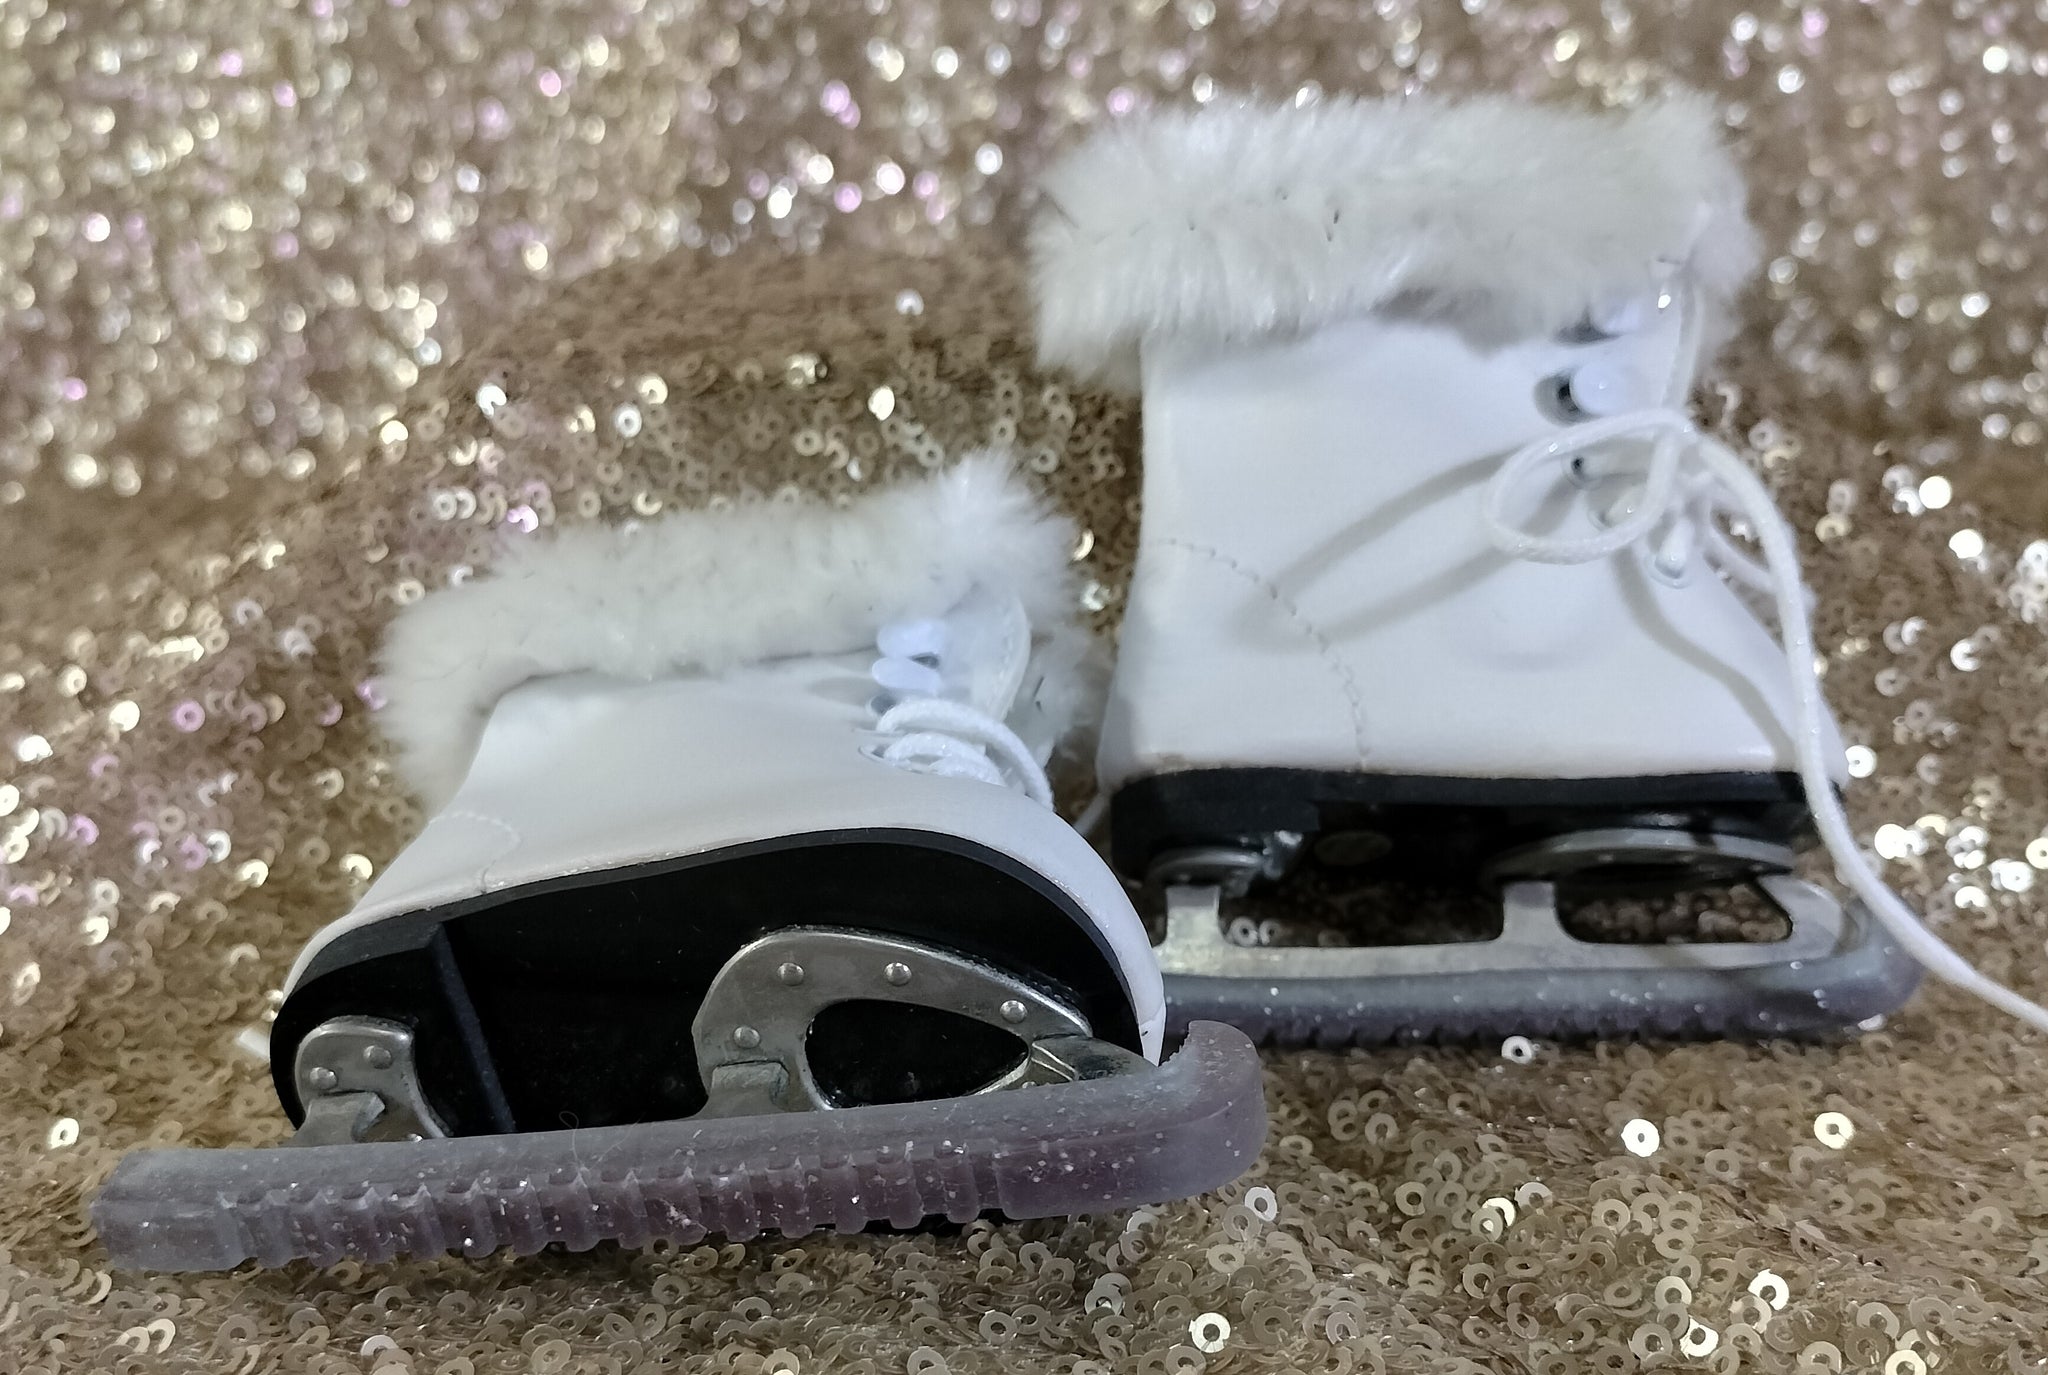 American Girl - Ice Skates for 18" Doll - Sparkly Faux-fur Edging - Glittery Skate Guards